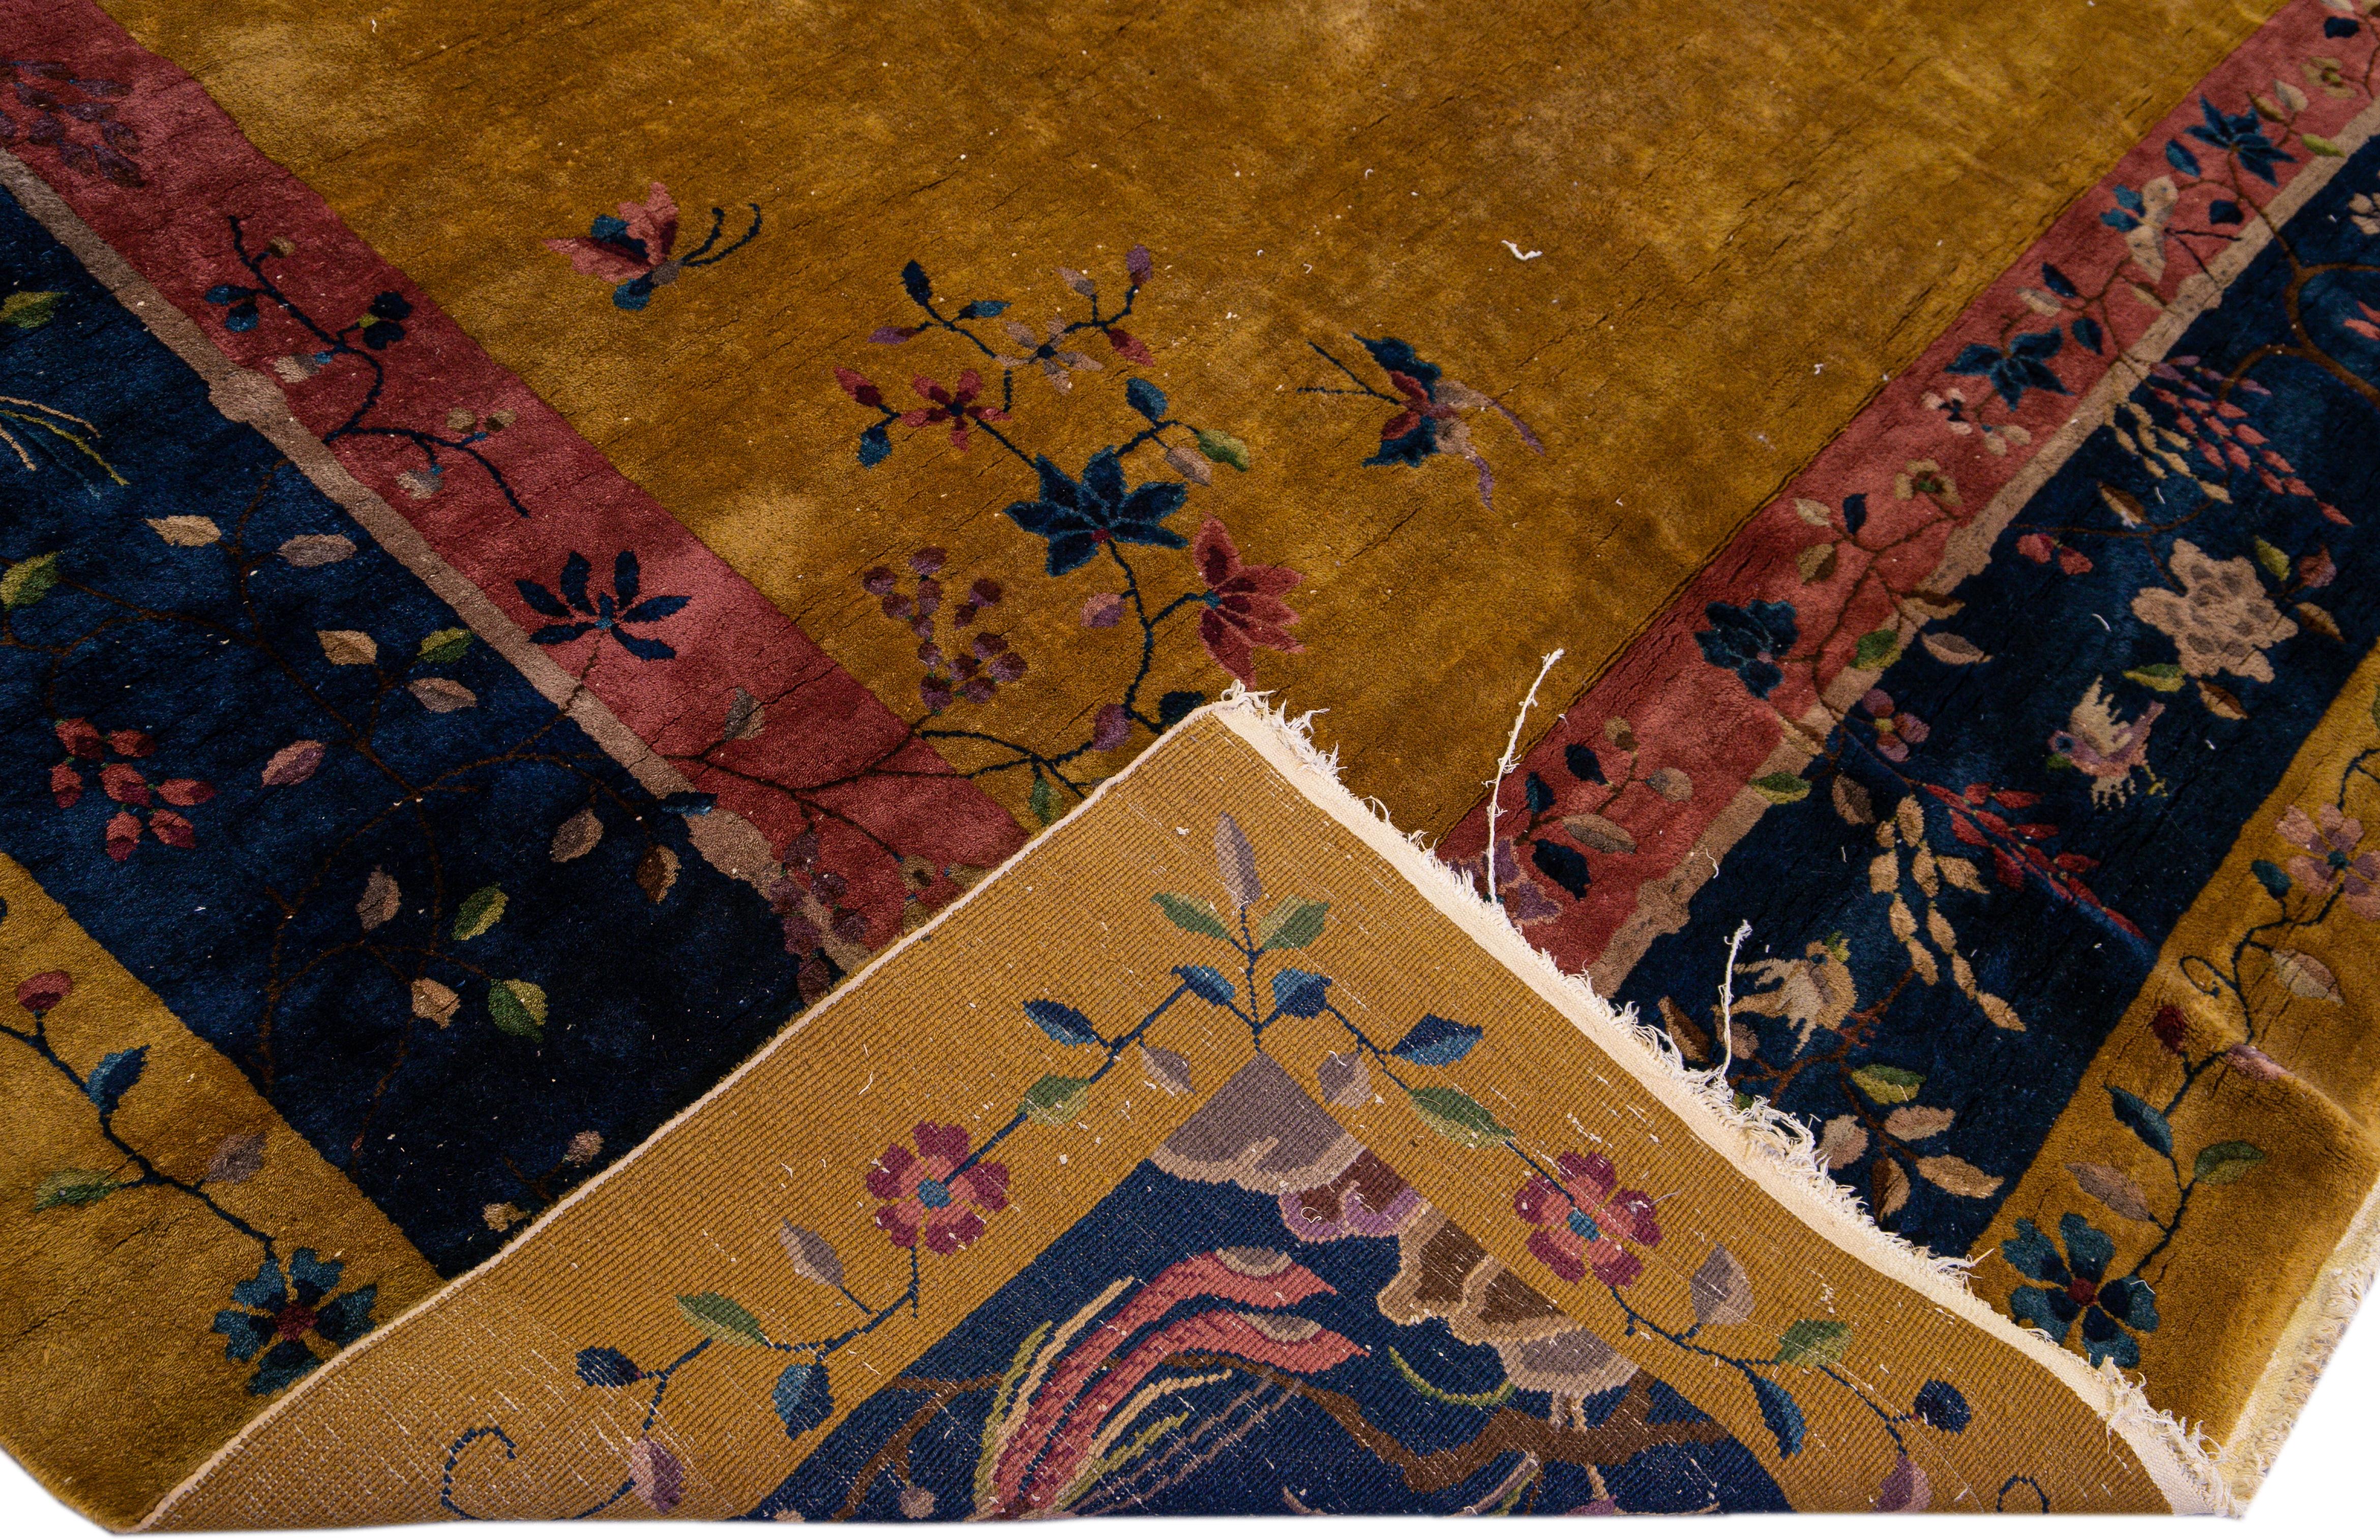 Beautiful antique Art Deco Chinese hand-knotted wool rug with a goldenrod field. This Chinese rug has a navy- blue and red frame multi-color accents in a gorgeous all-over traditional Chinese floral design. 

This rug measures: 11'11